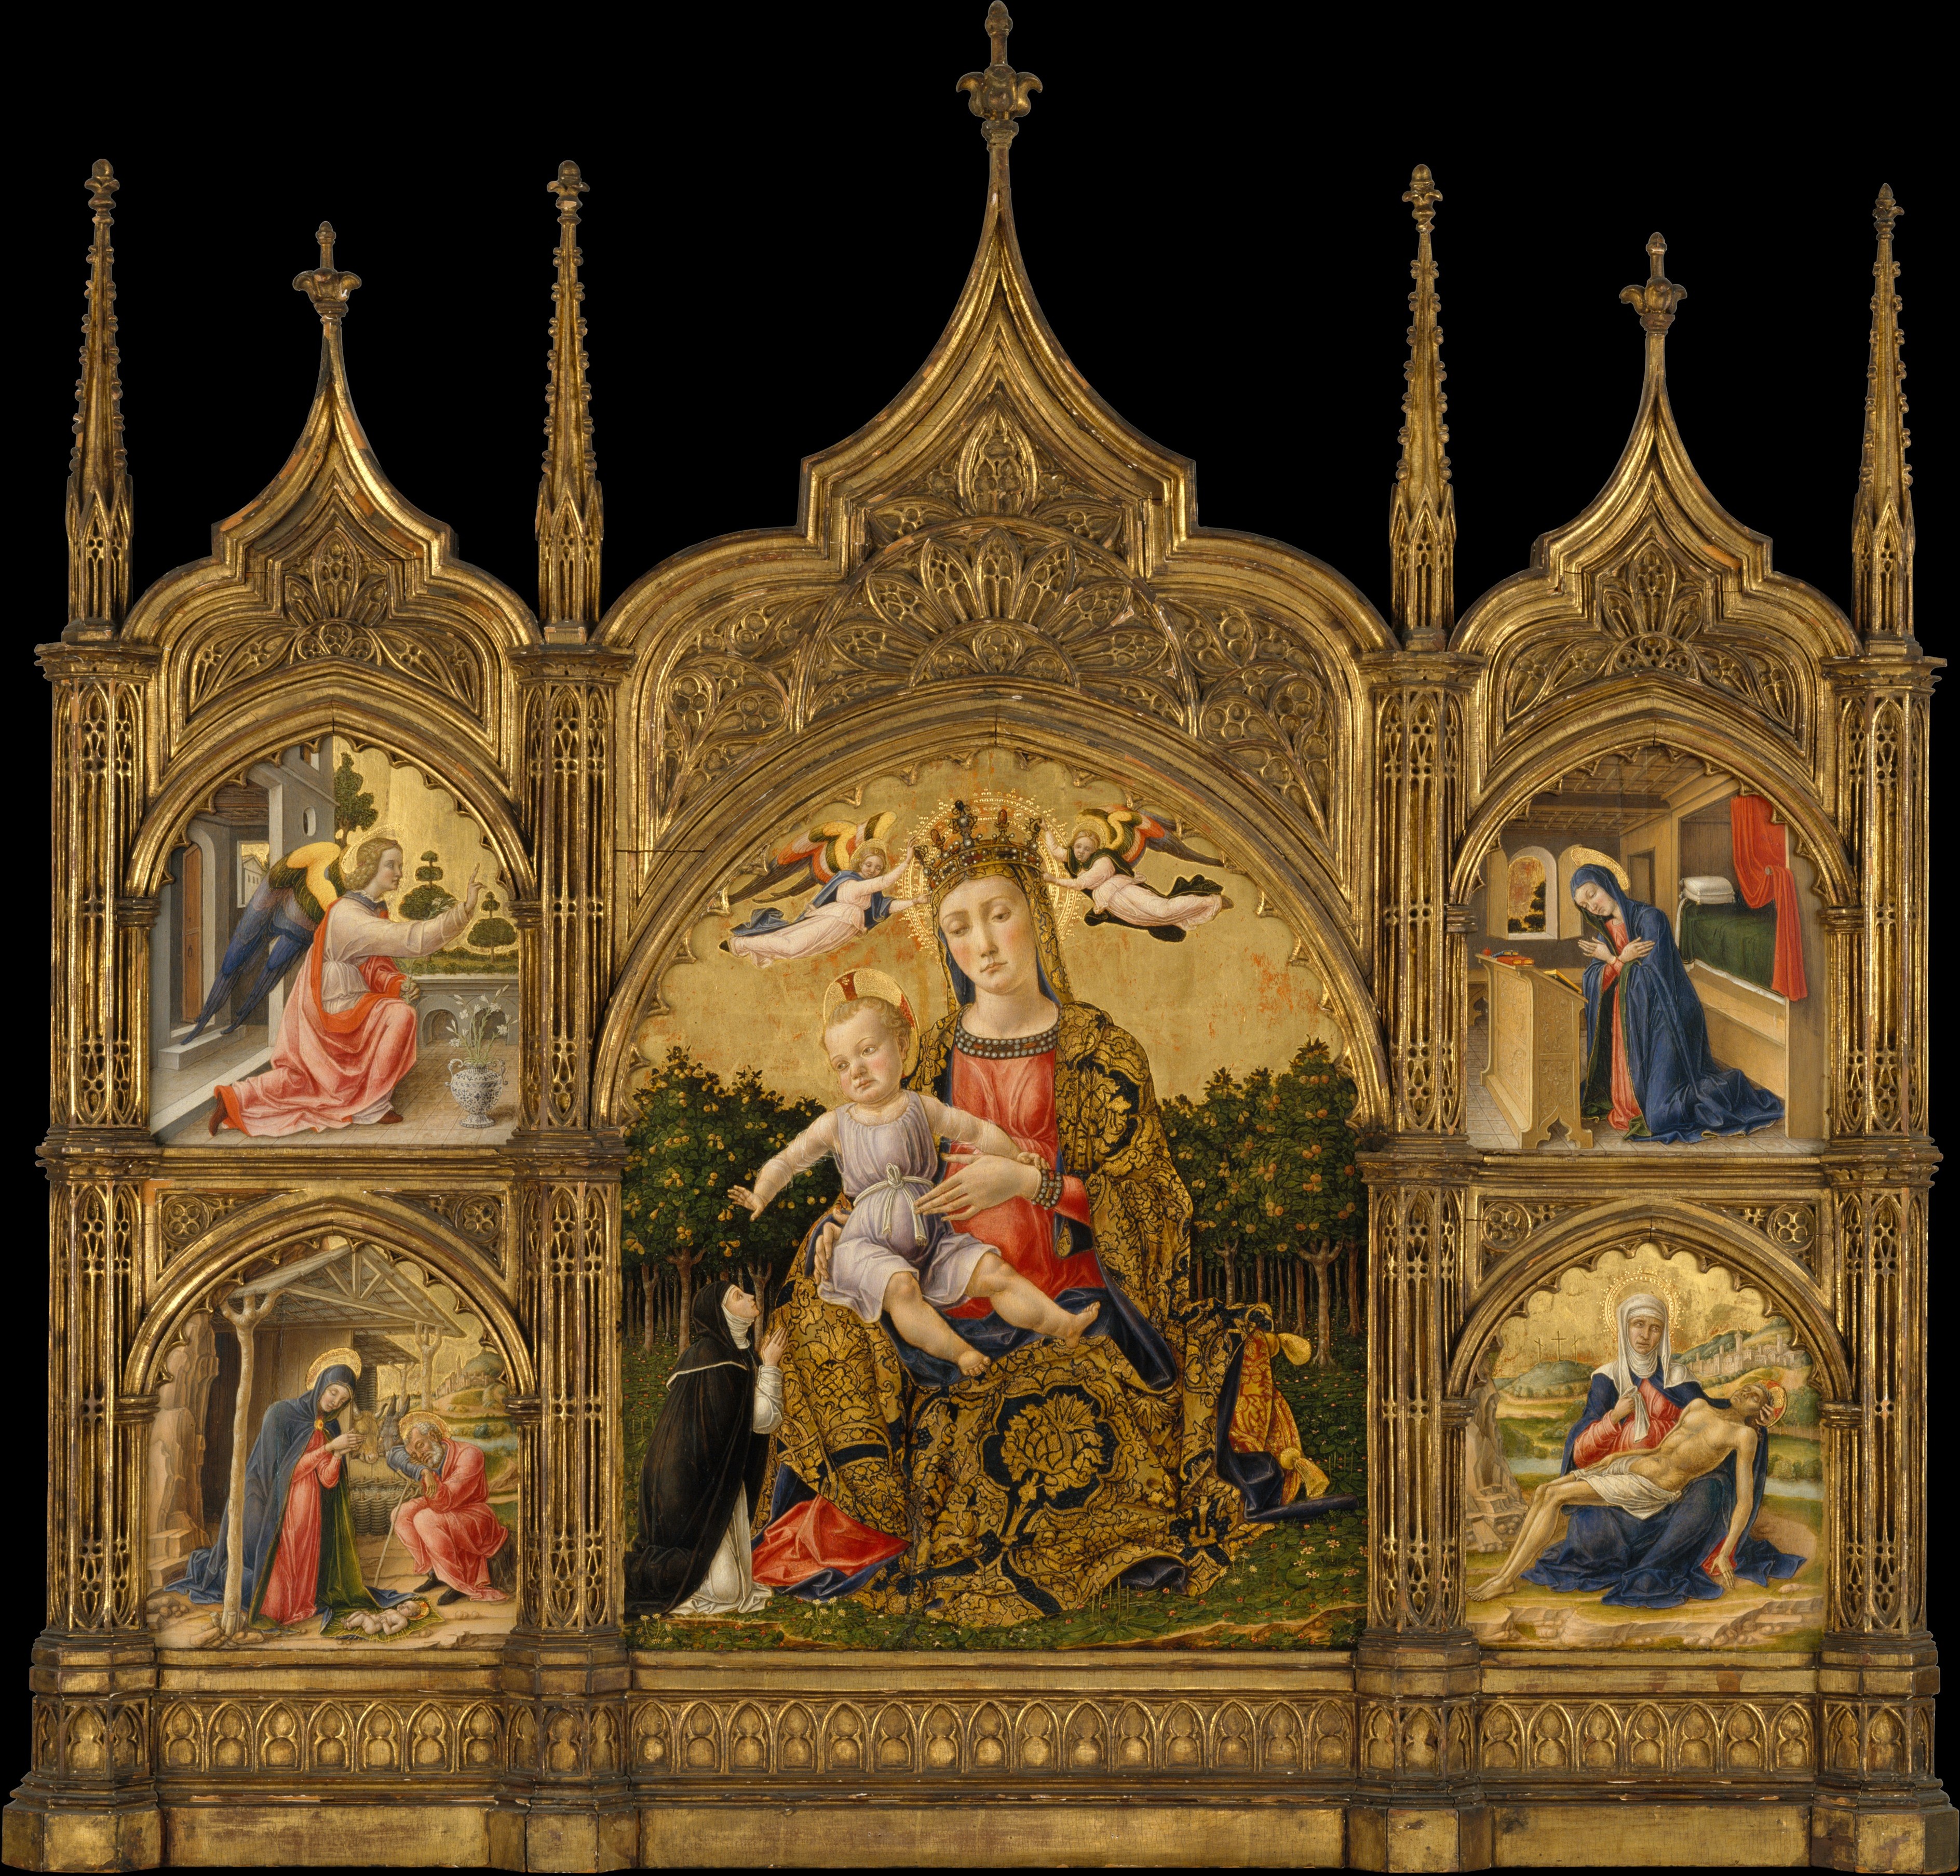 1465 Vivarini The Madonna of Humility (member of the Dominican Order), the Annunciation, the Nativity, and the Pieta MET